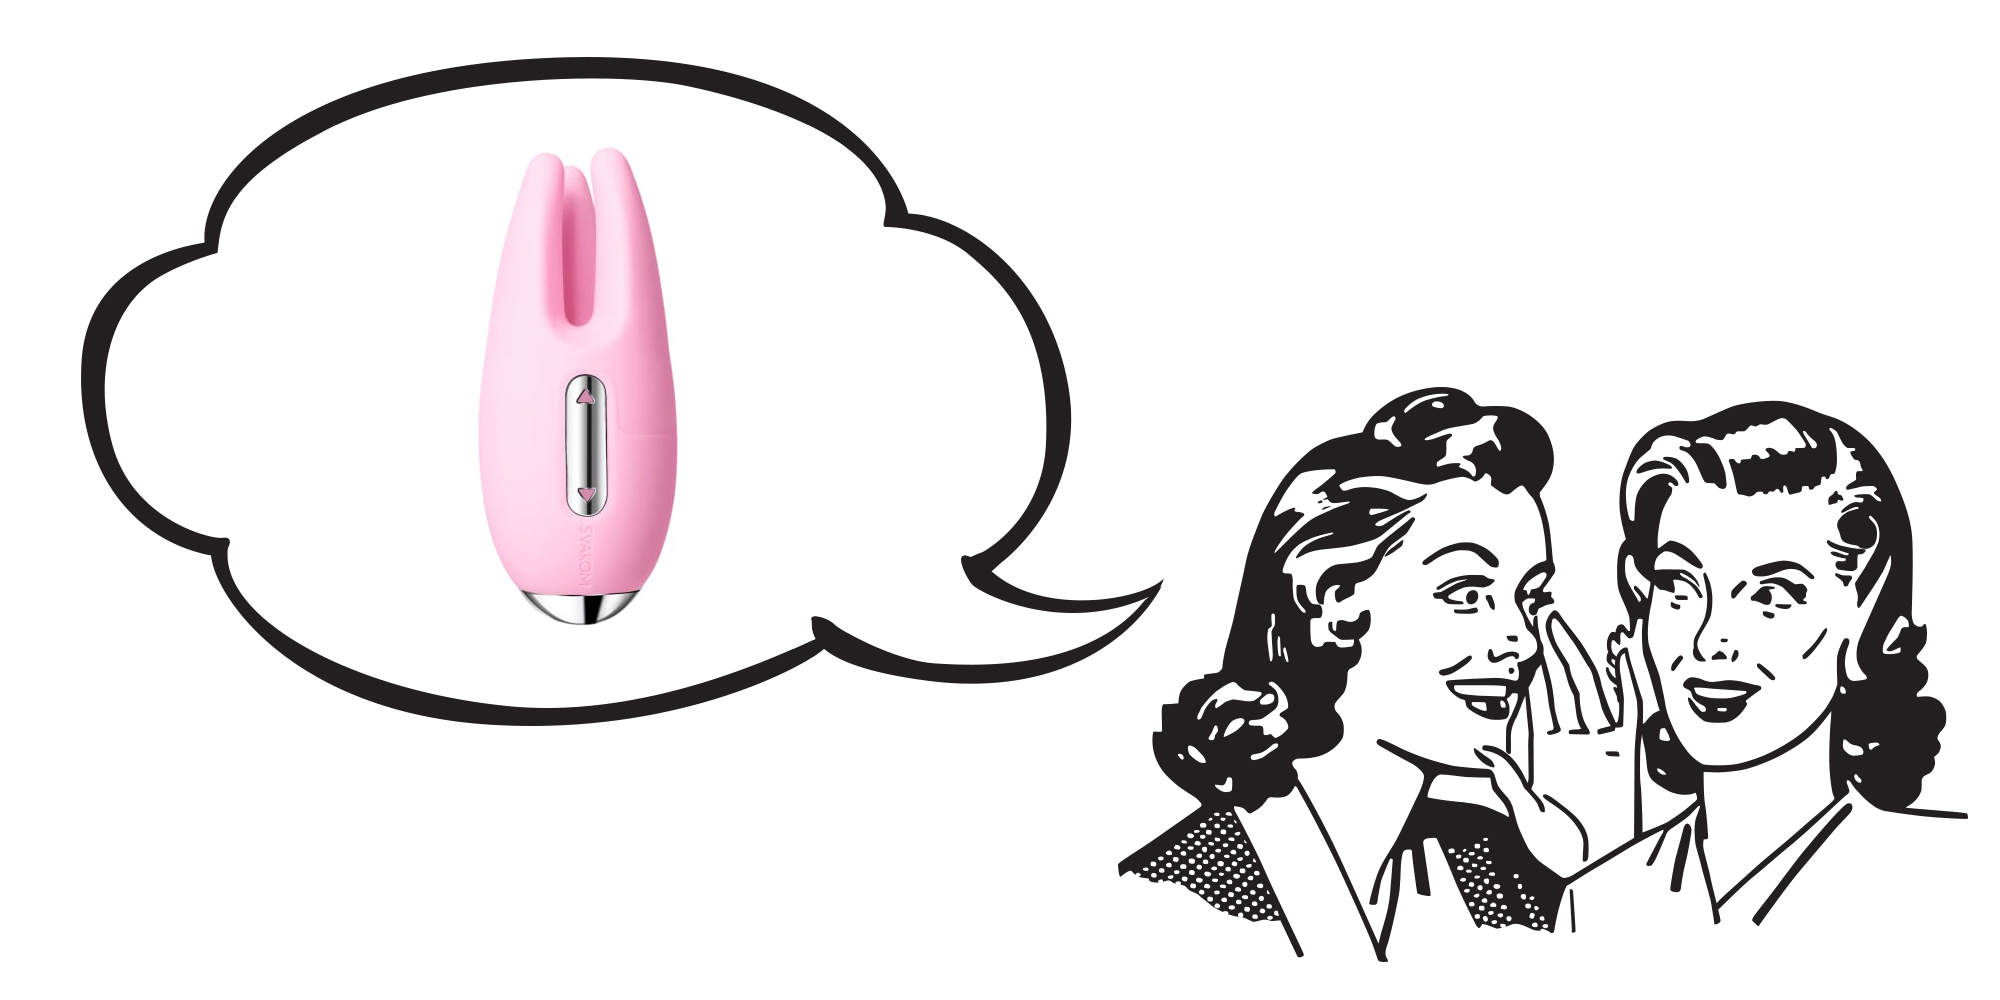 An illustration of two 50's-era styled women whispering to each other; a speech bubble contains the Cookie Vibrator, a pink three-pronged silicone vibrator